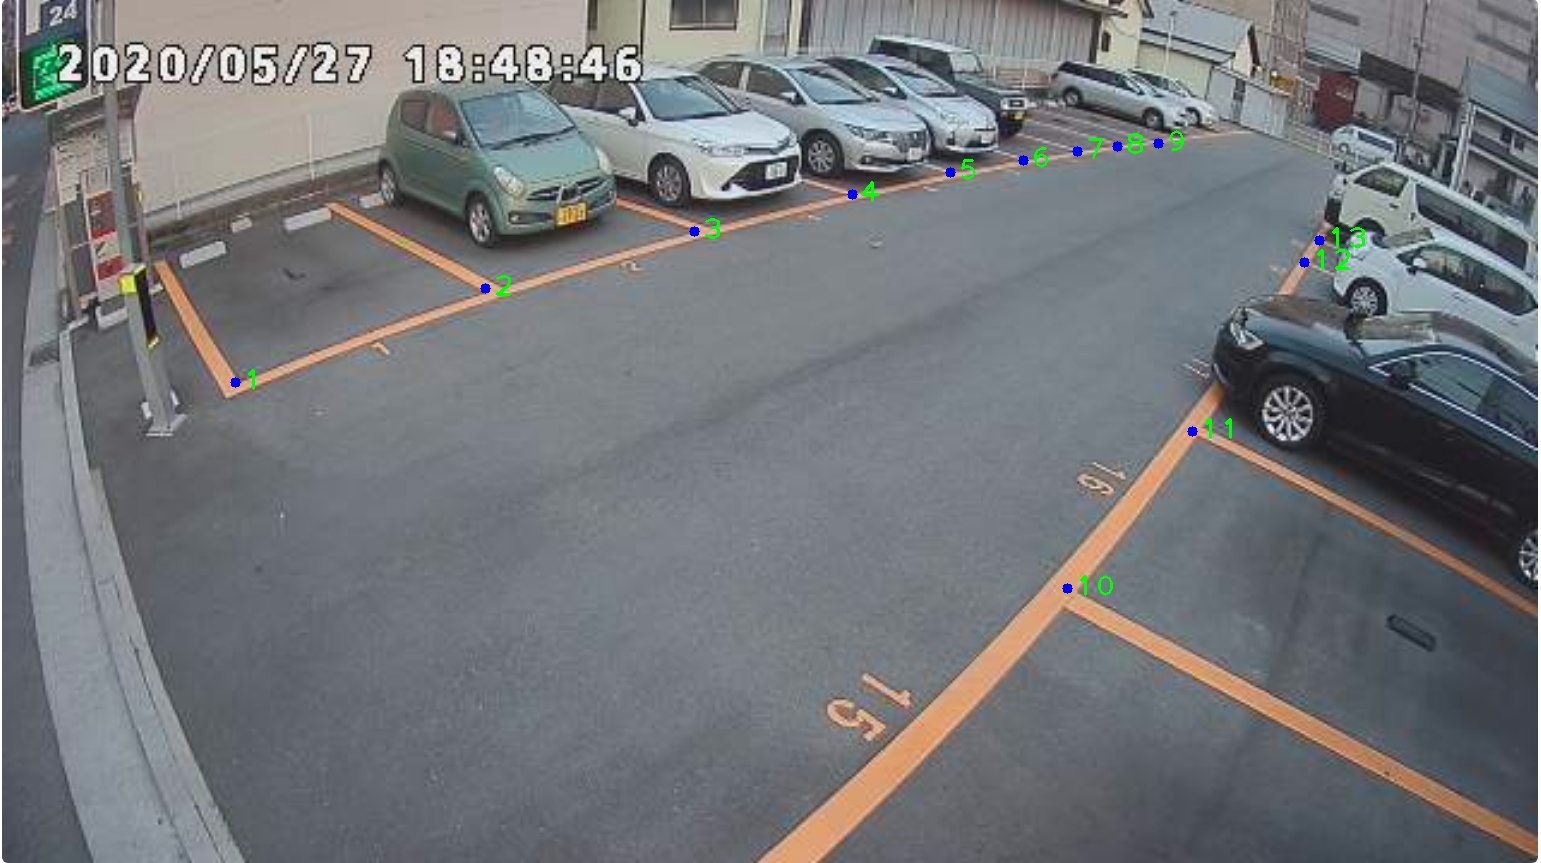 Fig 7:   Key-Points marked on the camera view image